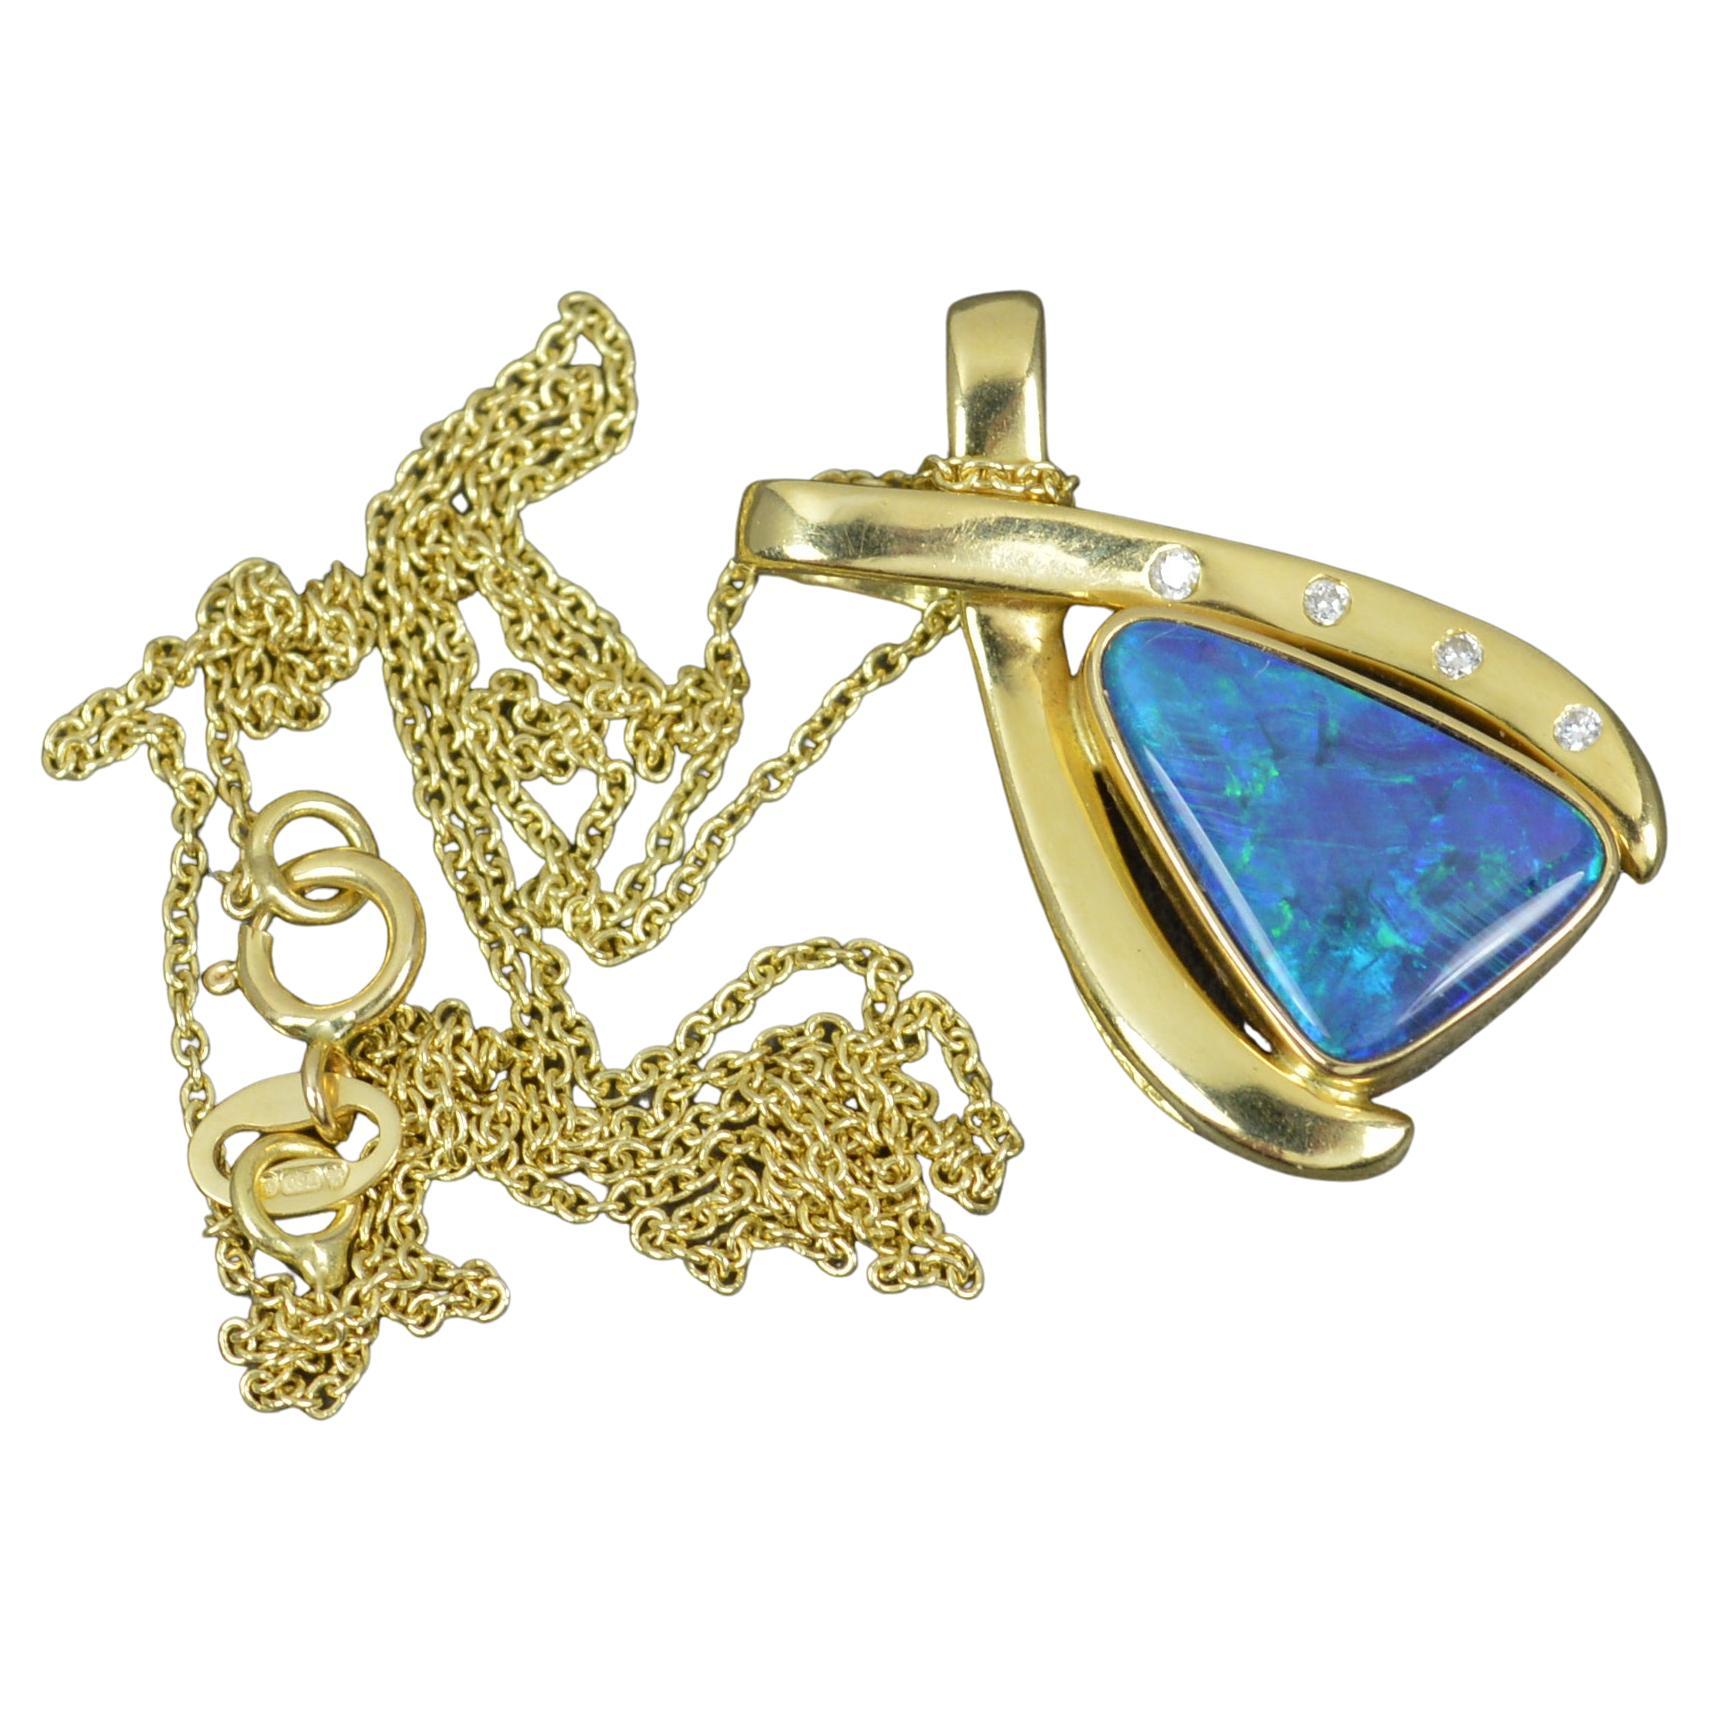 Impressive 18 Carat Gold Opal and Diamond Pendant and Chain